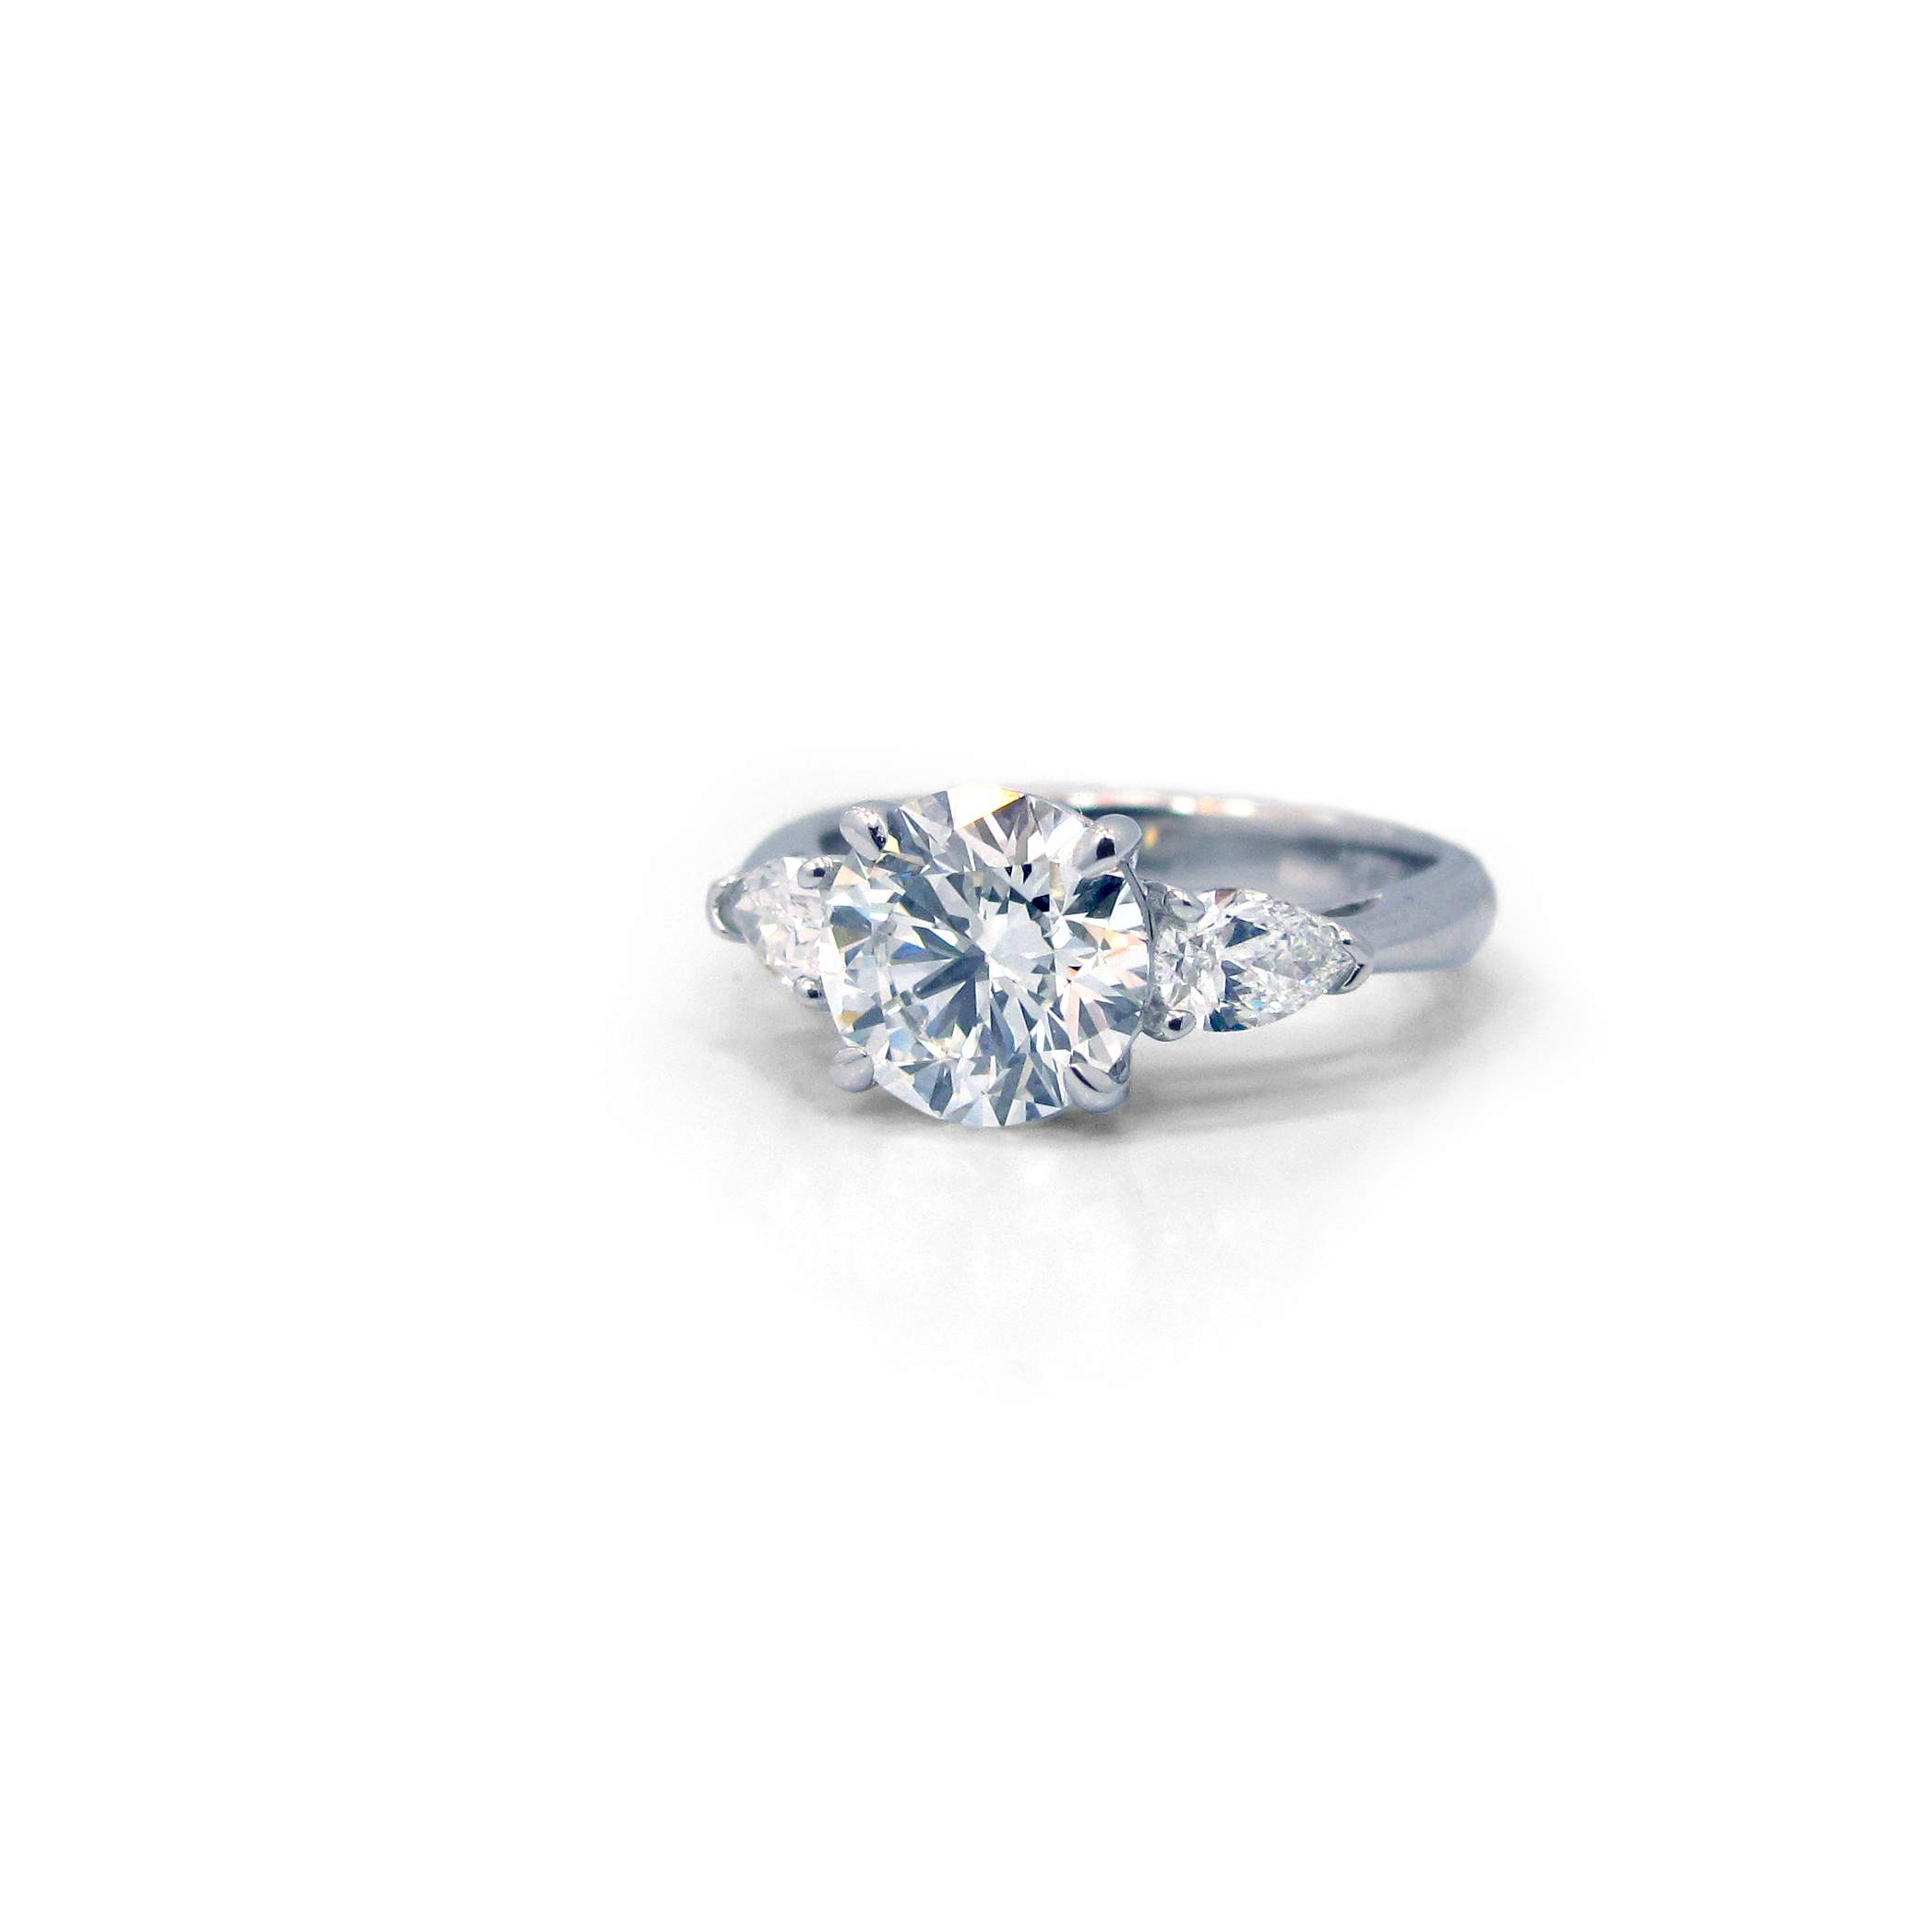 This is a picture of a Platinum Three Stone Setting with Two Pear Side Stones